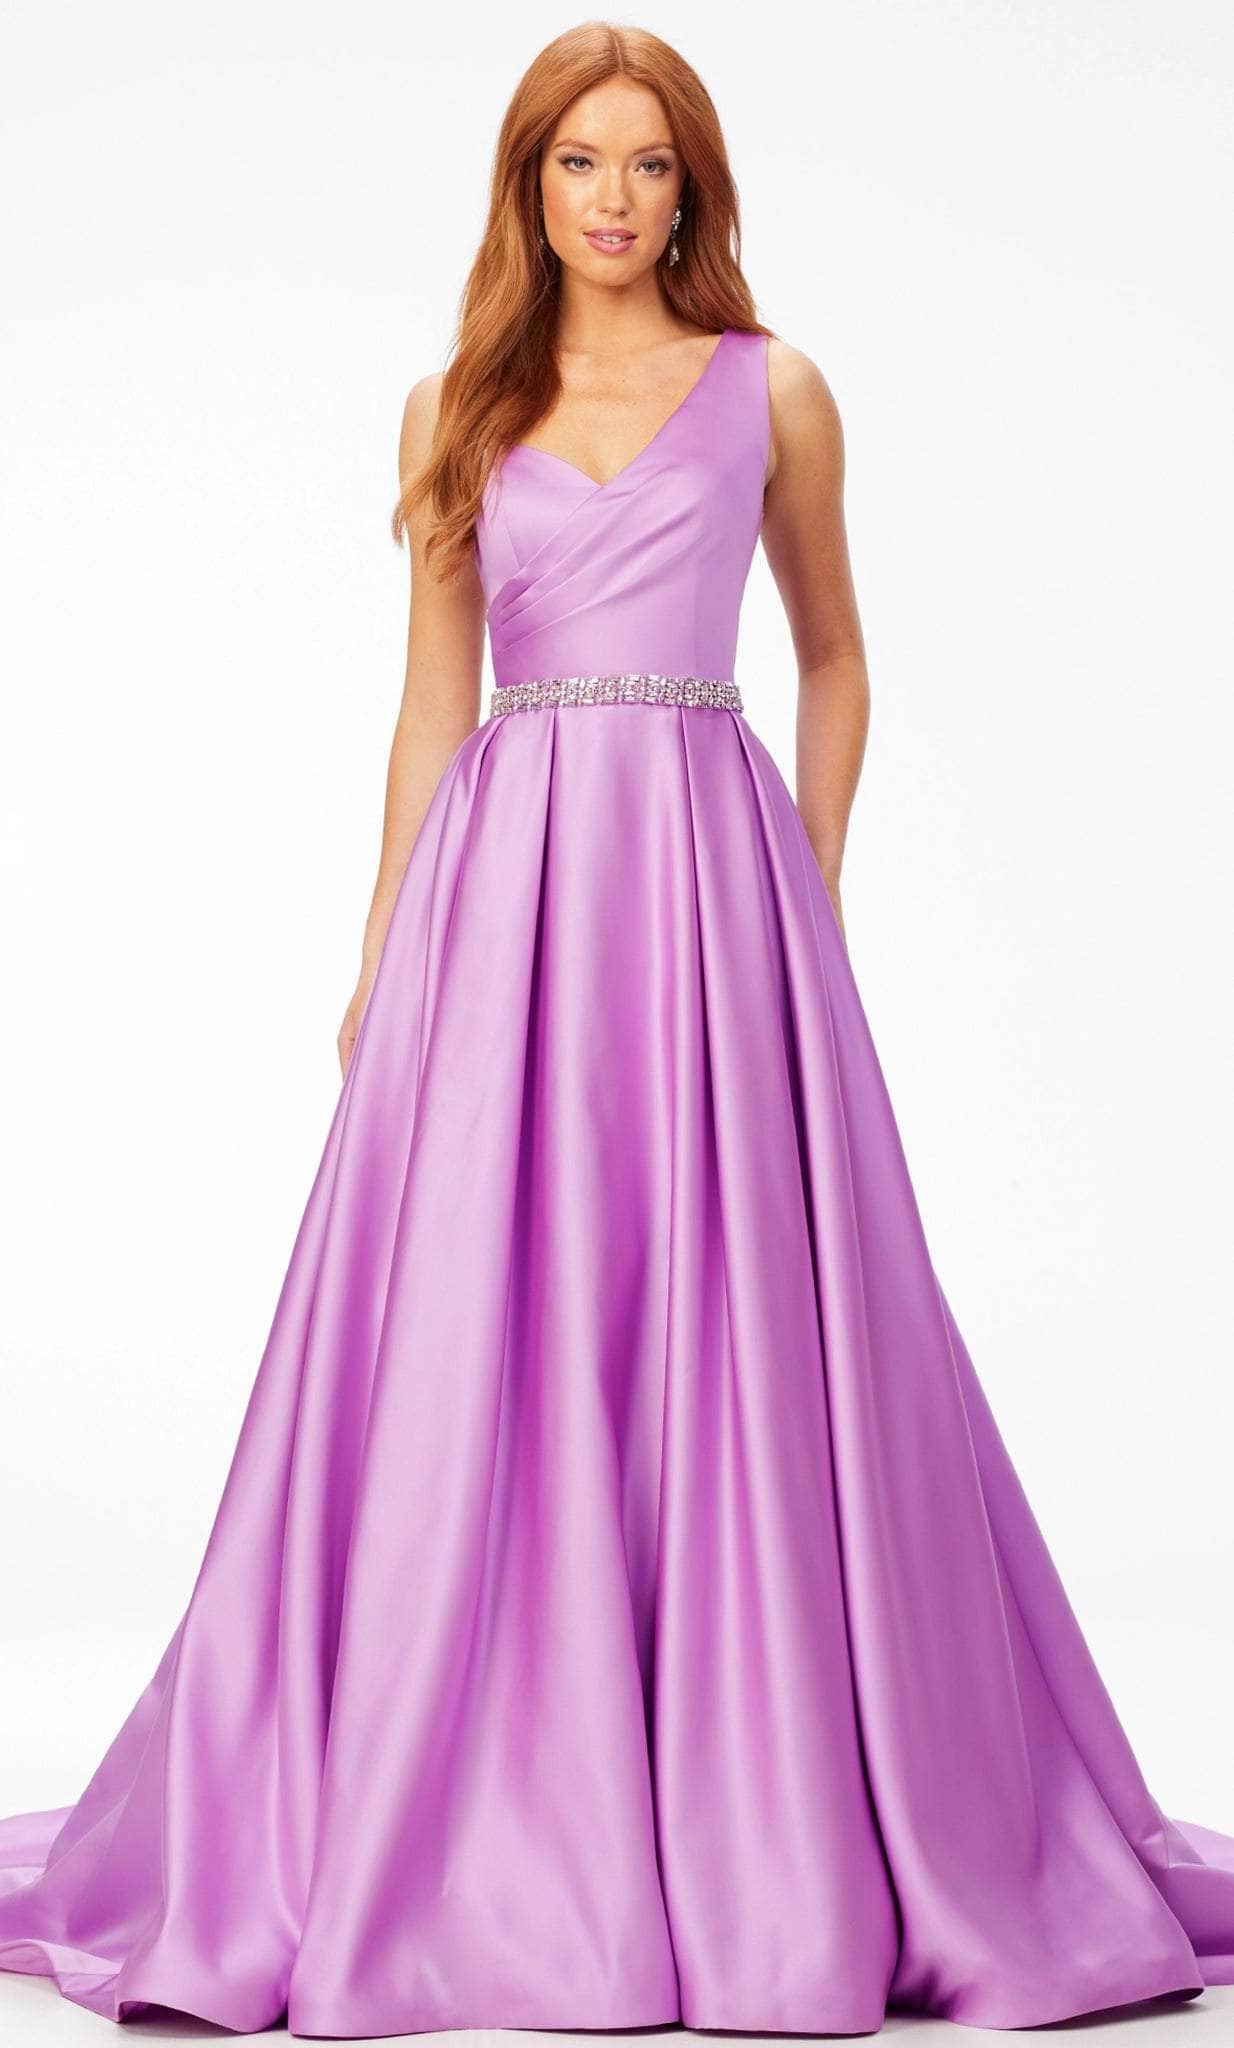 Image of Ashley Lauren 11075 - Satin Pleated One Shoulder A-line Gown